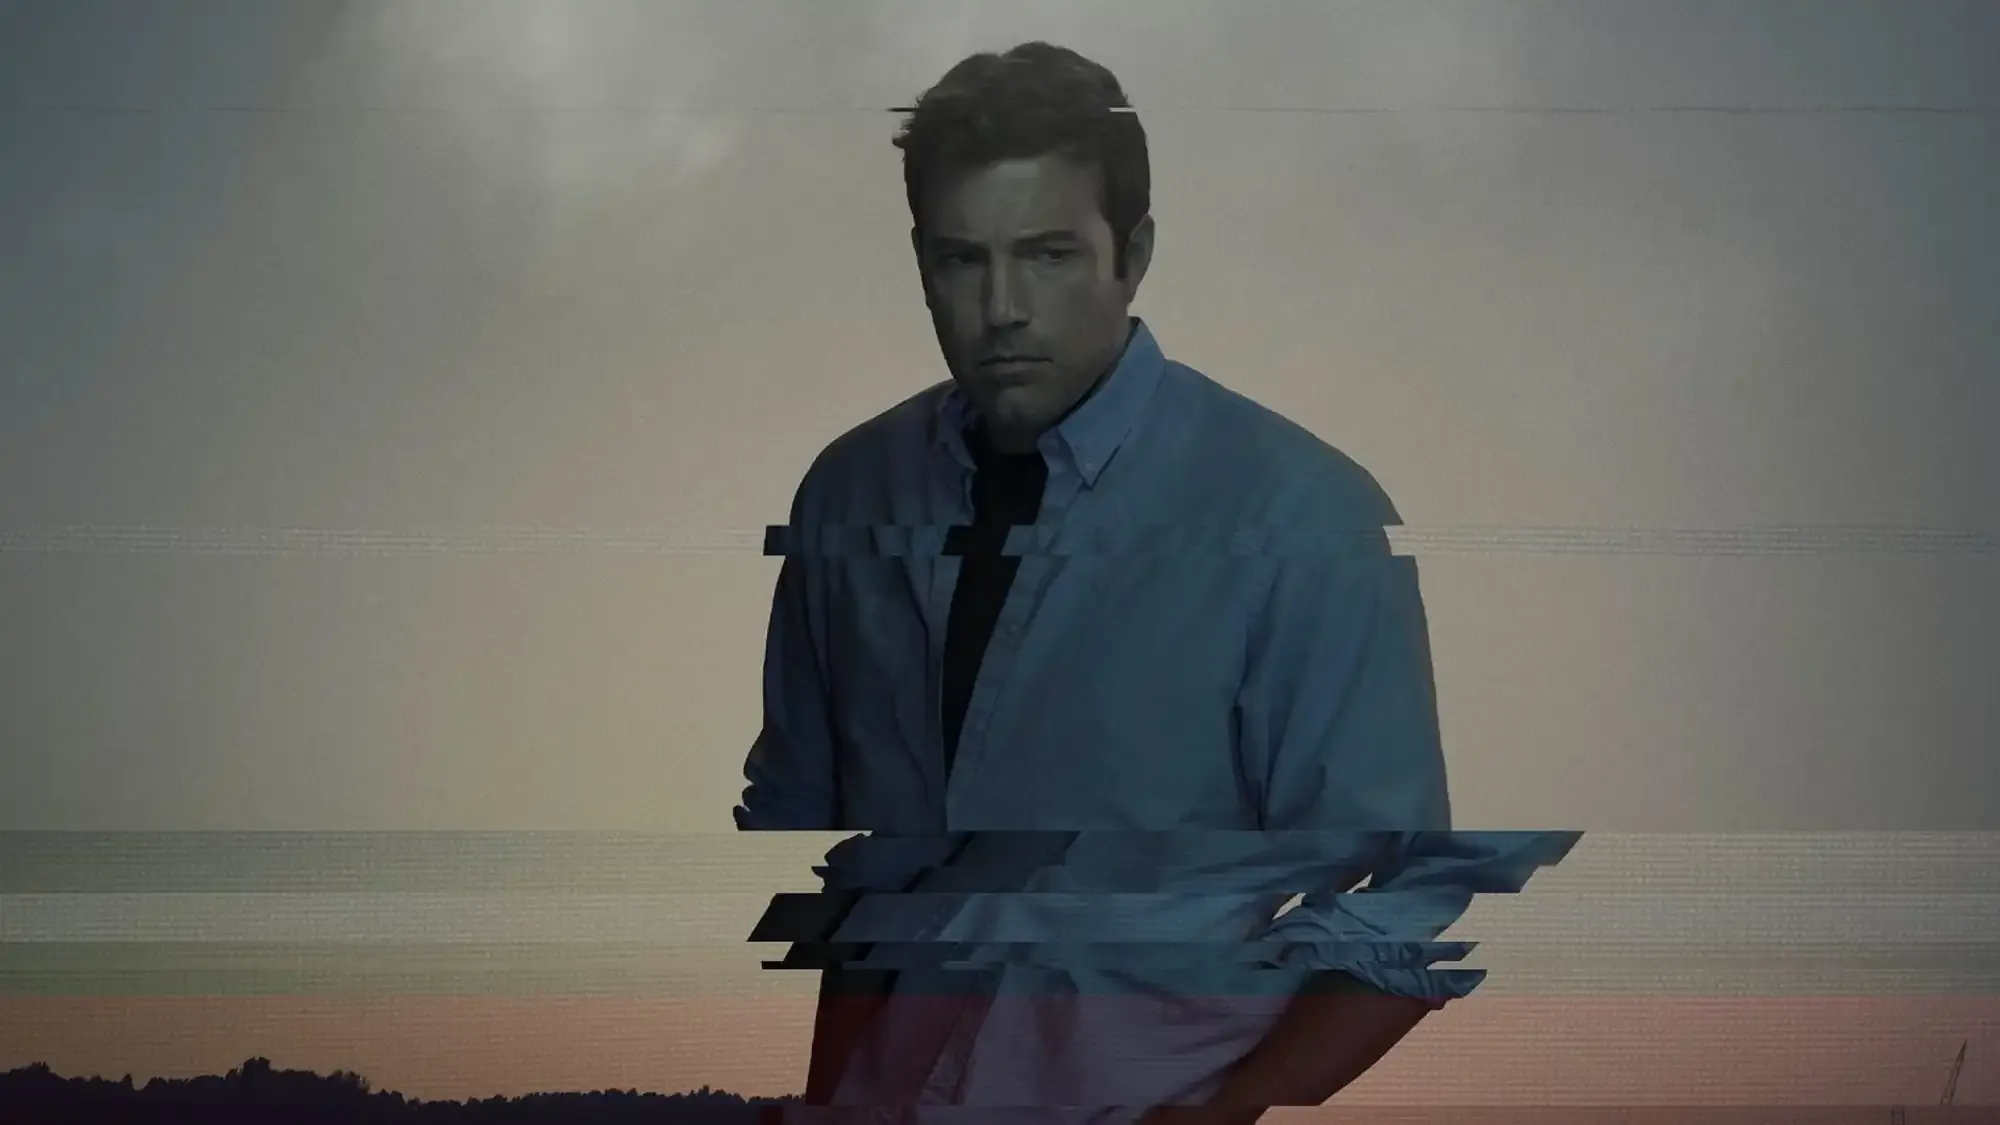 Gone Girl movie review